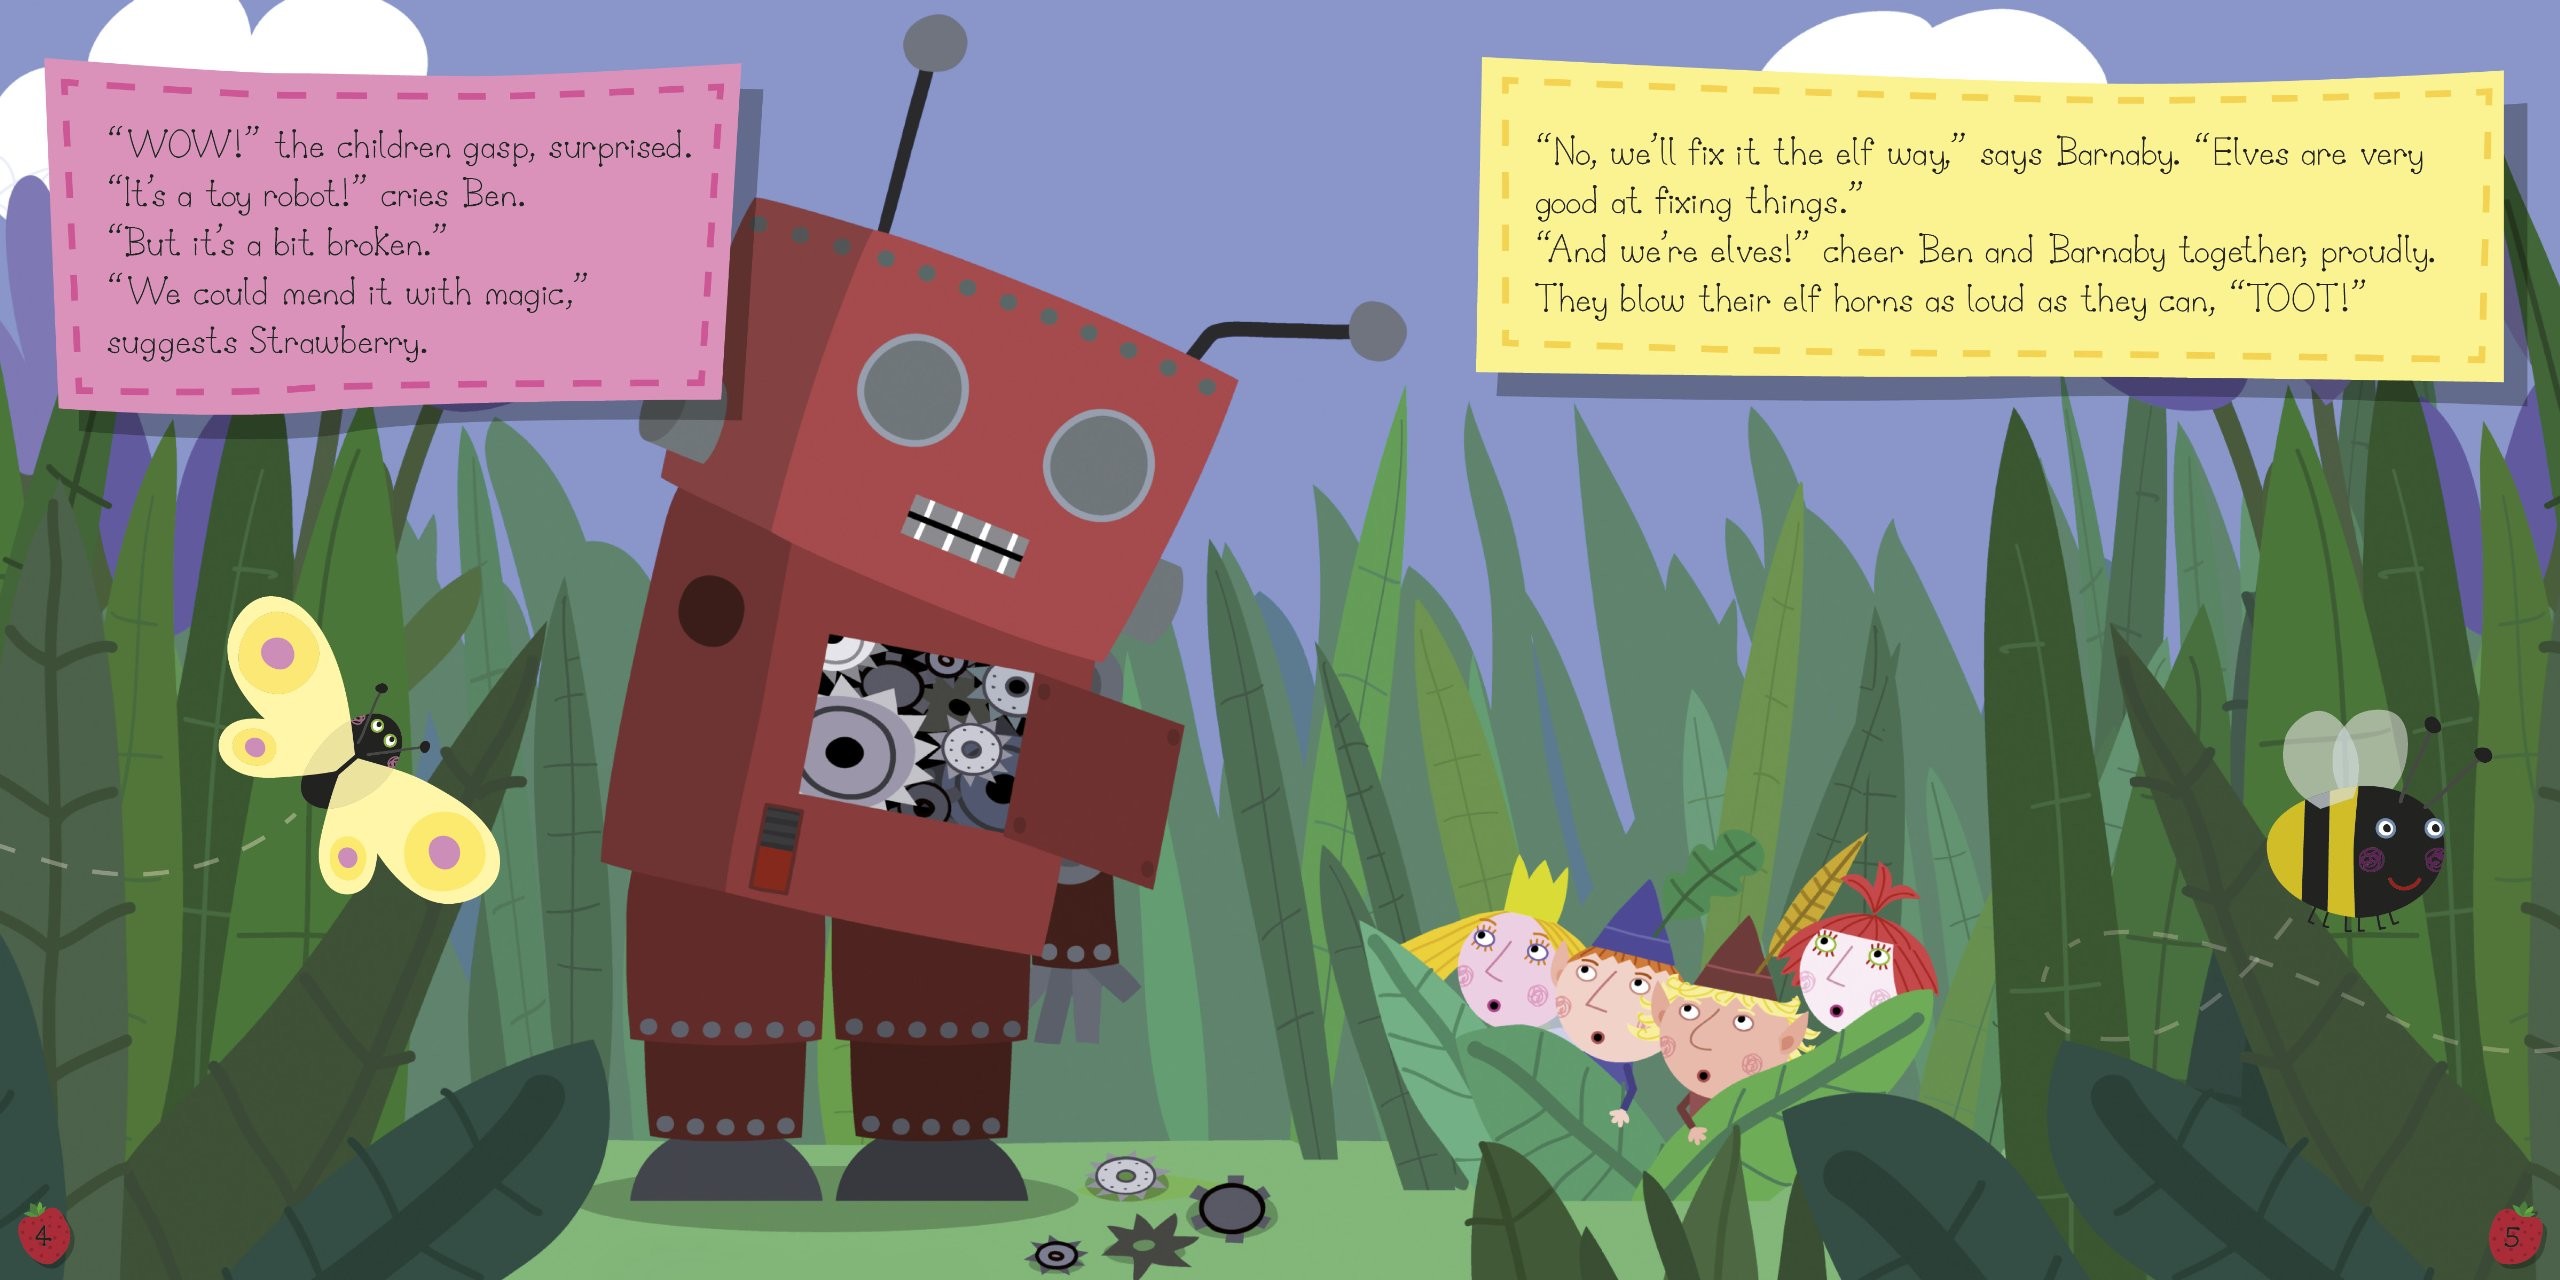 2560x1280 Ben and Holly's Little Kingdom: The Toy Robot Storybook (Ben & Holly's  Little Kingdom): Amazon.co.uk: Ladybird(Ladybird): 9781409308898: Books